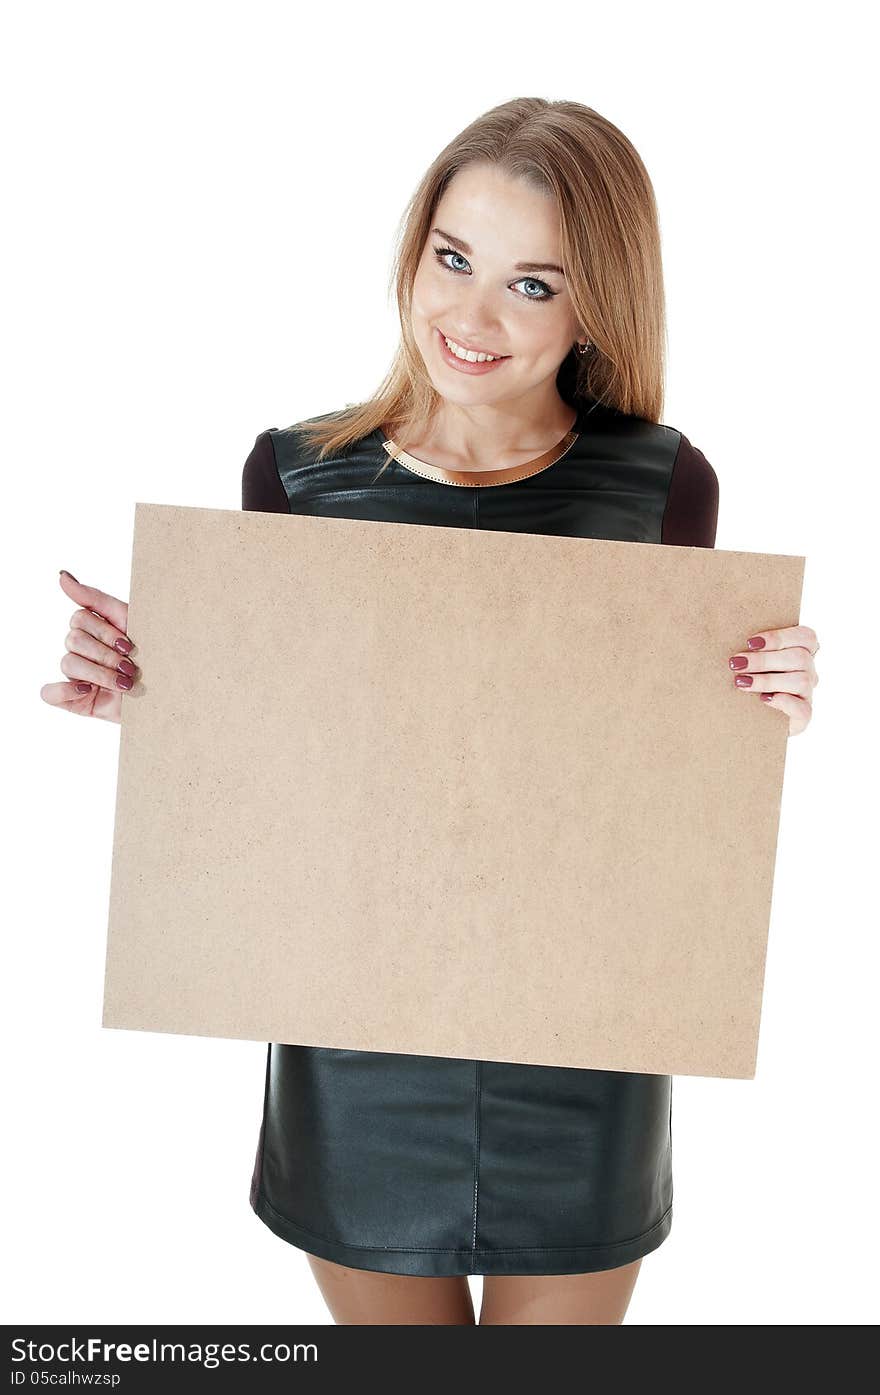 Beautiful smiling girl in a dark dress showing empty wooden notice board, isolated on white background/ space for text. Beautiful smiling girl in a dark dress showing empty wooden notice board, isolated on white background/ space for text.